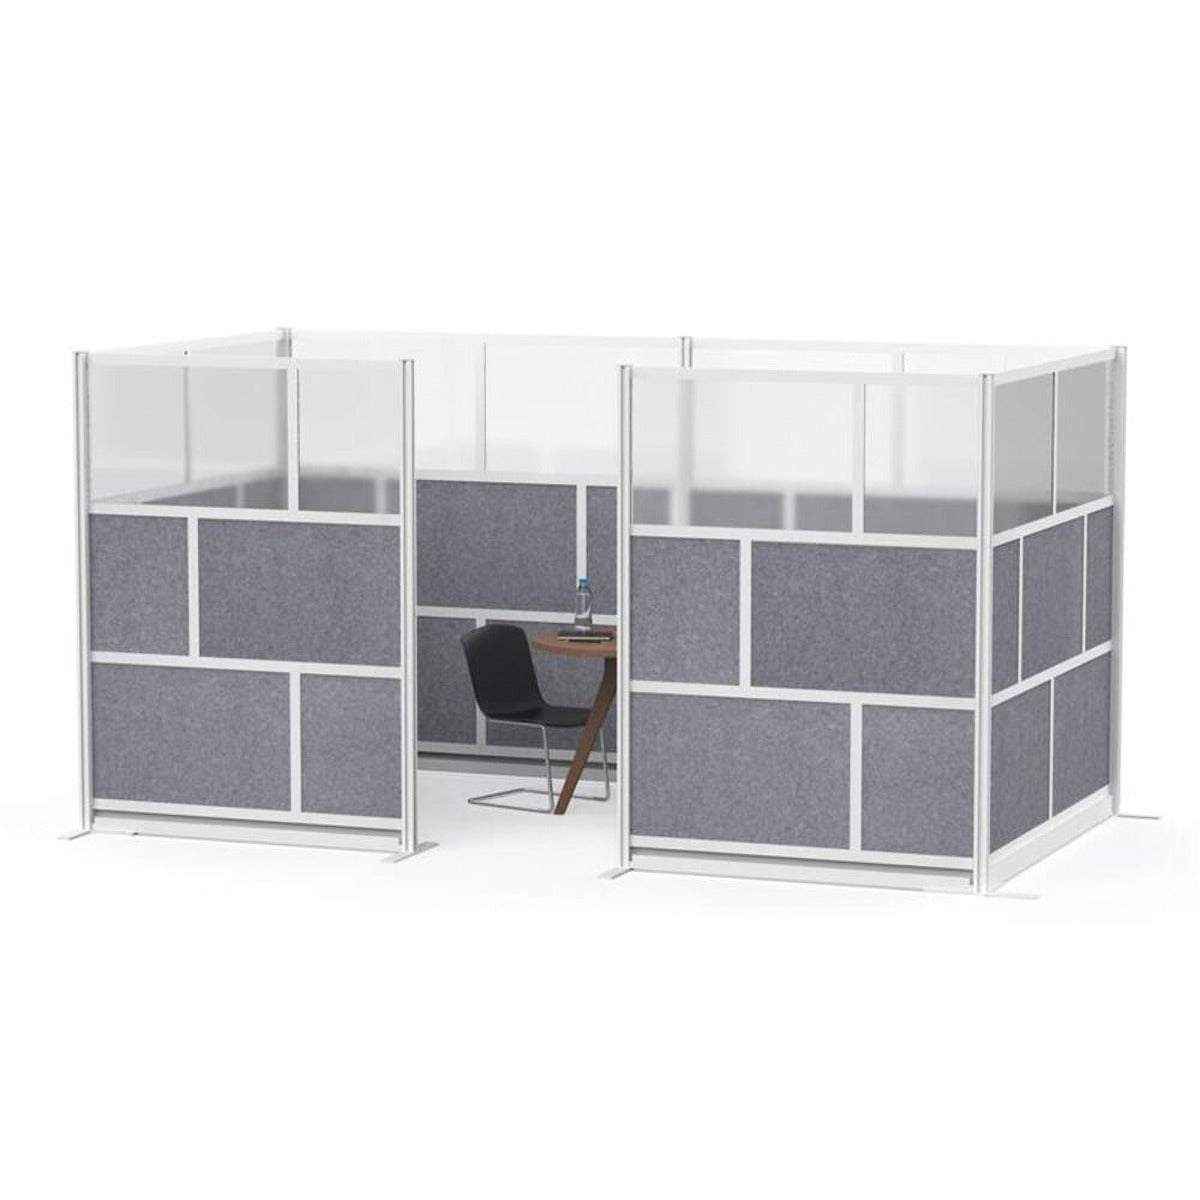 Luxor MW-5348-XFCG - Luxor Modular Room Divider Wall System - 53" x 48" Add-On Wall - SchoolOutlet